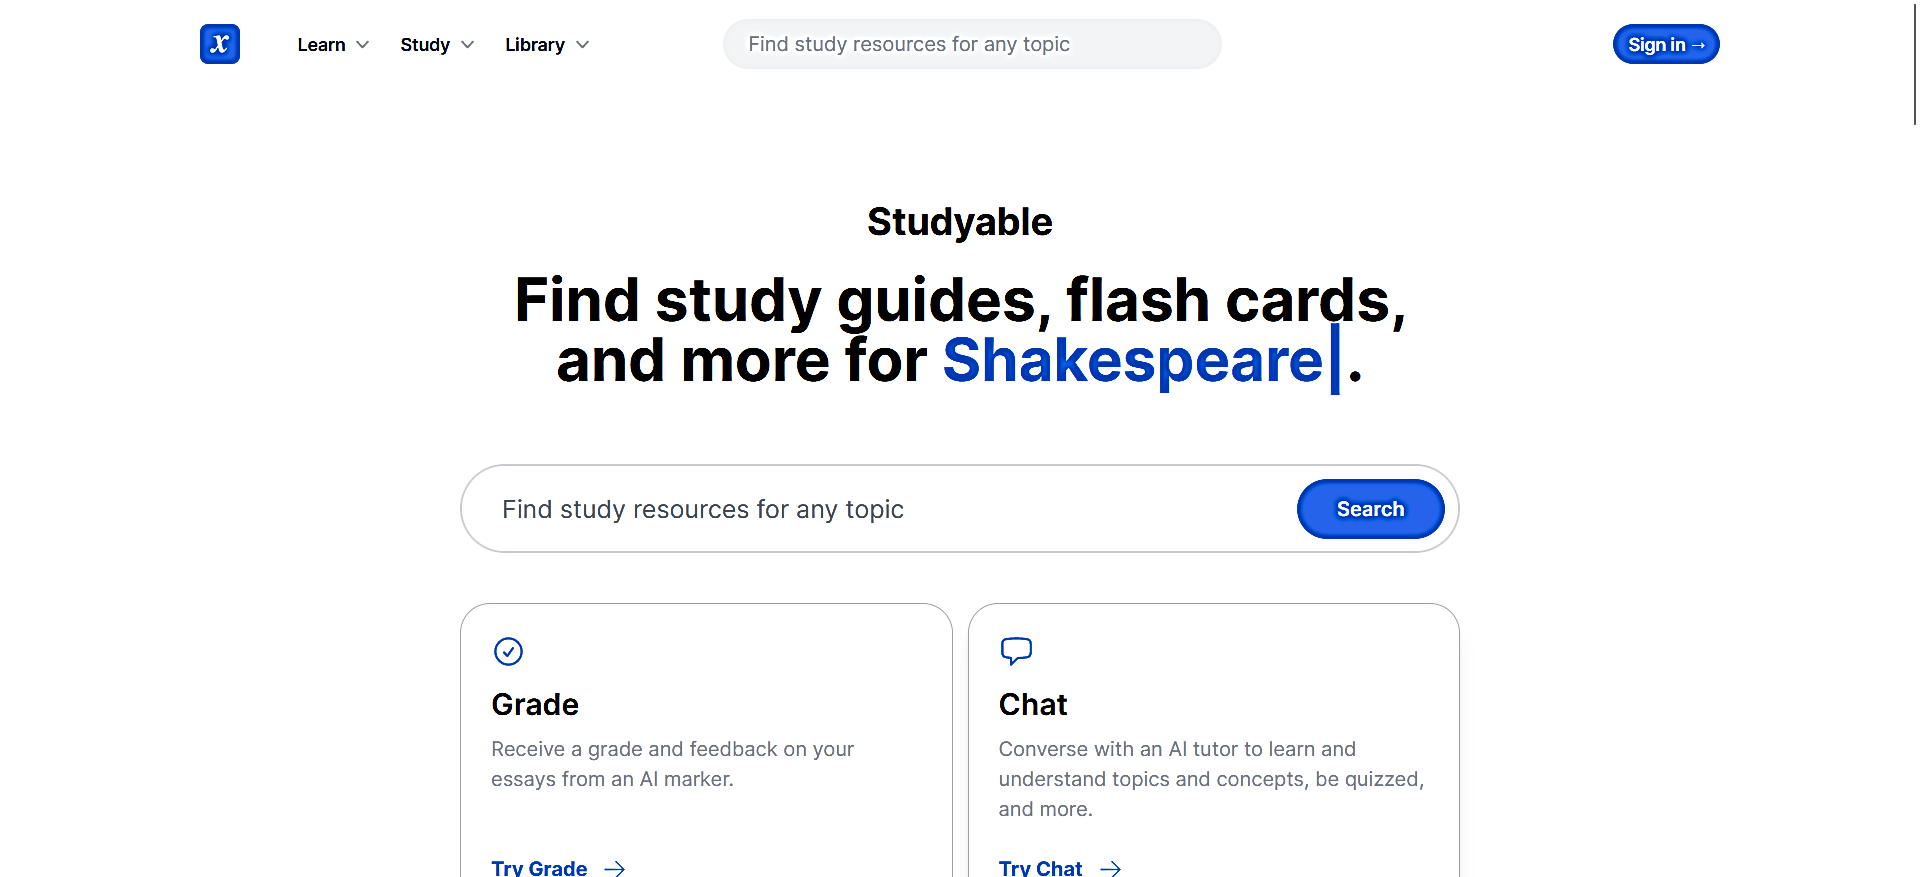 Studyable featured